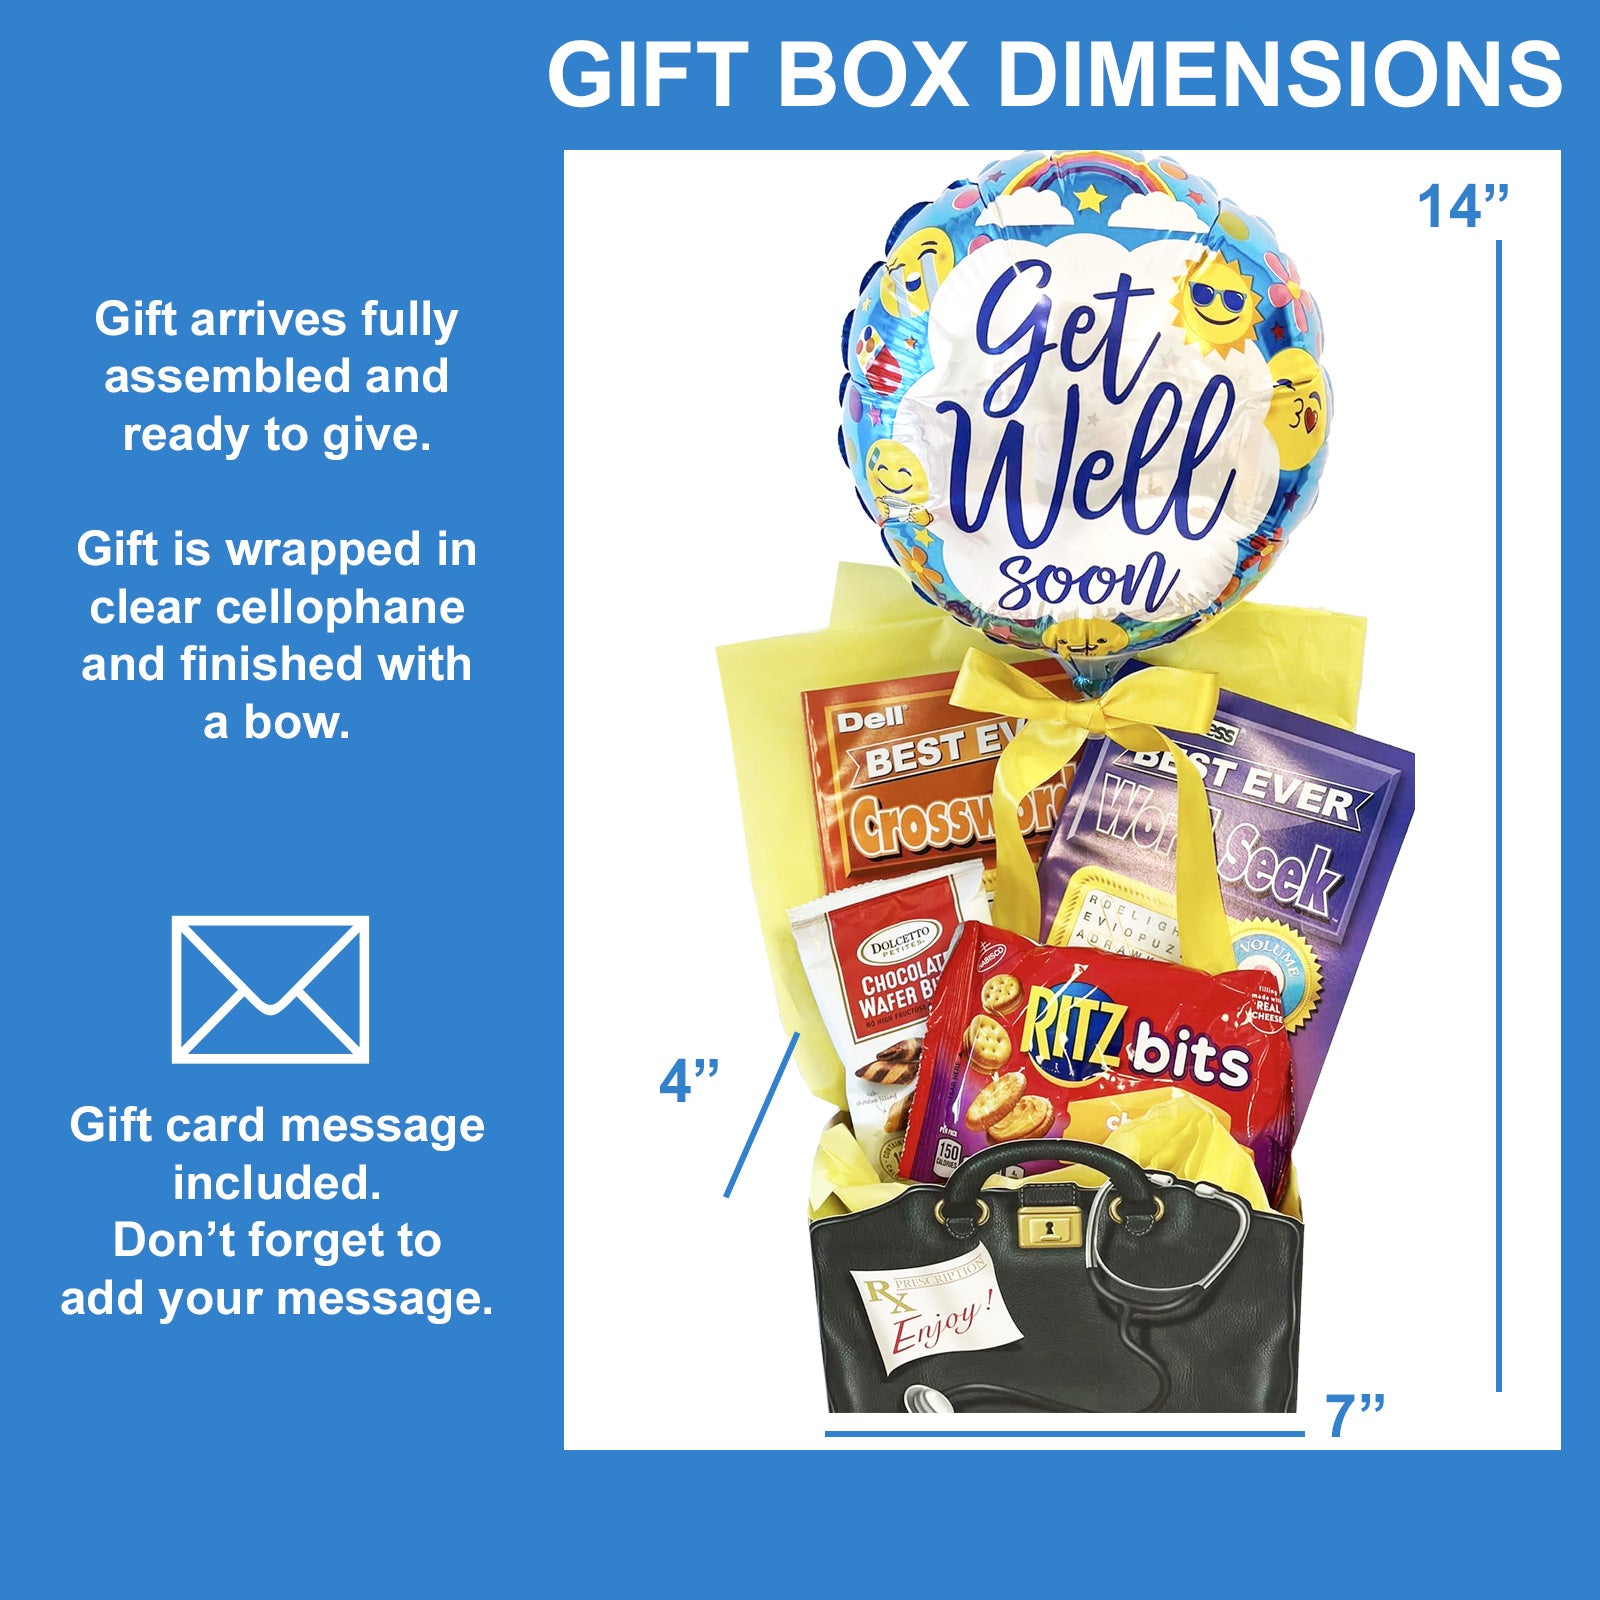 Feel Better Soon Get Well Gift Box Relaxing Get-Well Gift for Men, Women, Friends and Family Gift Basket has Food and Boredom Busters for After Surgery, Recovery, Illness, Thinking of You